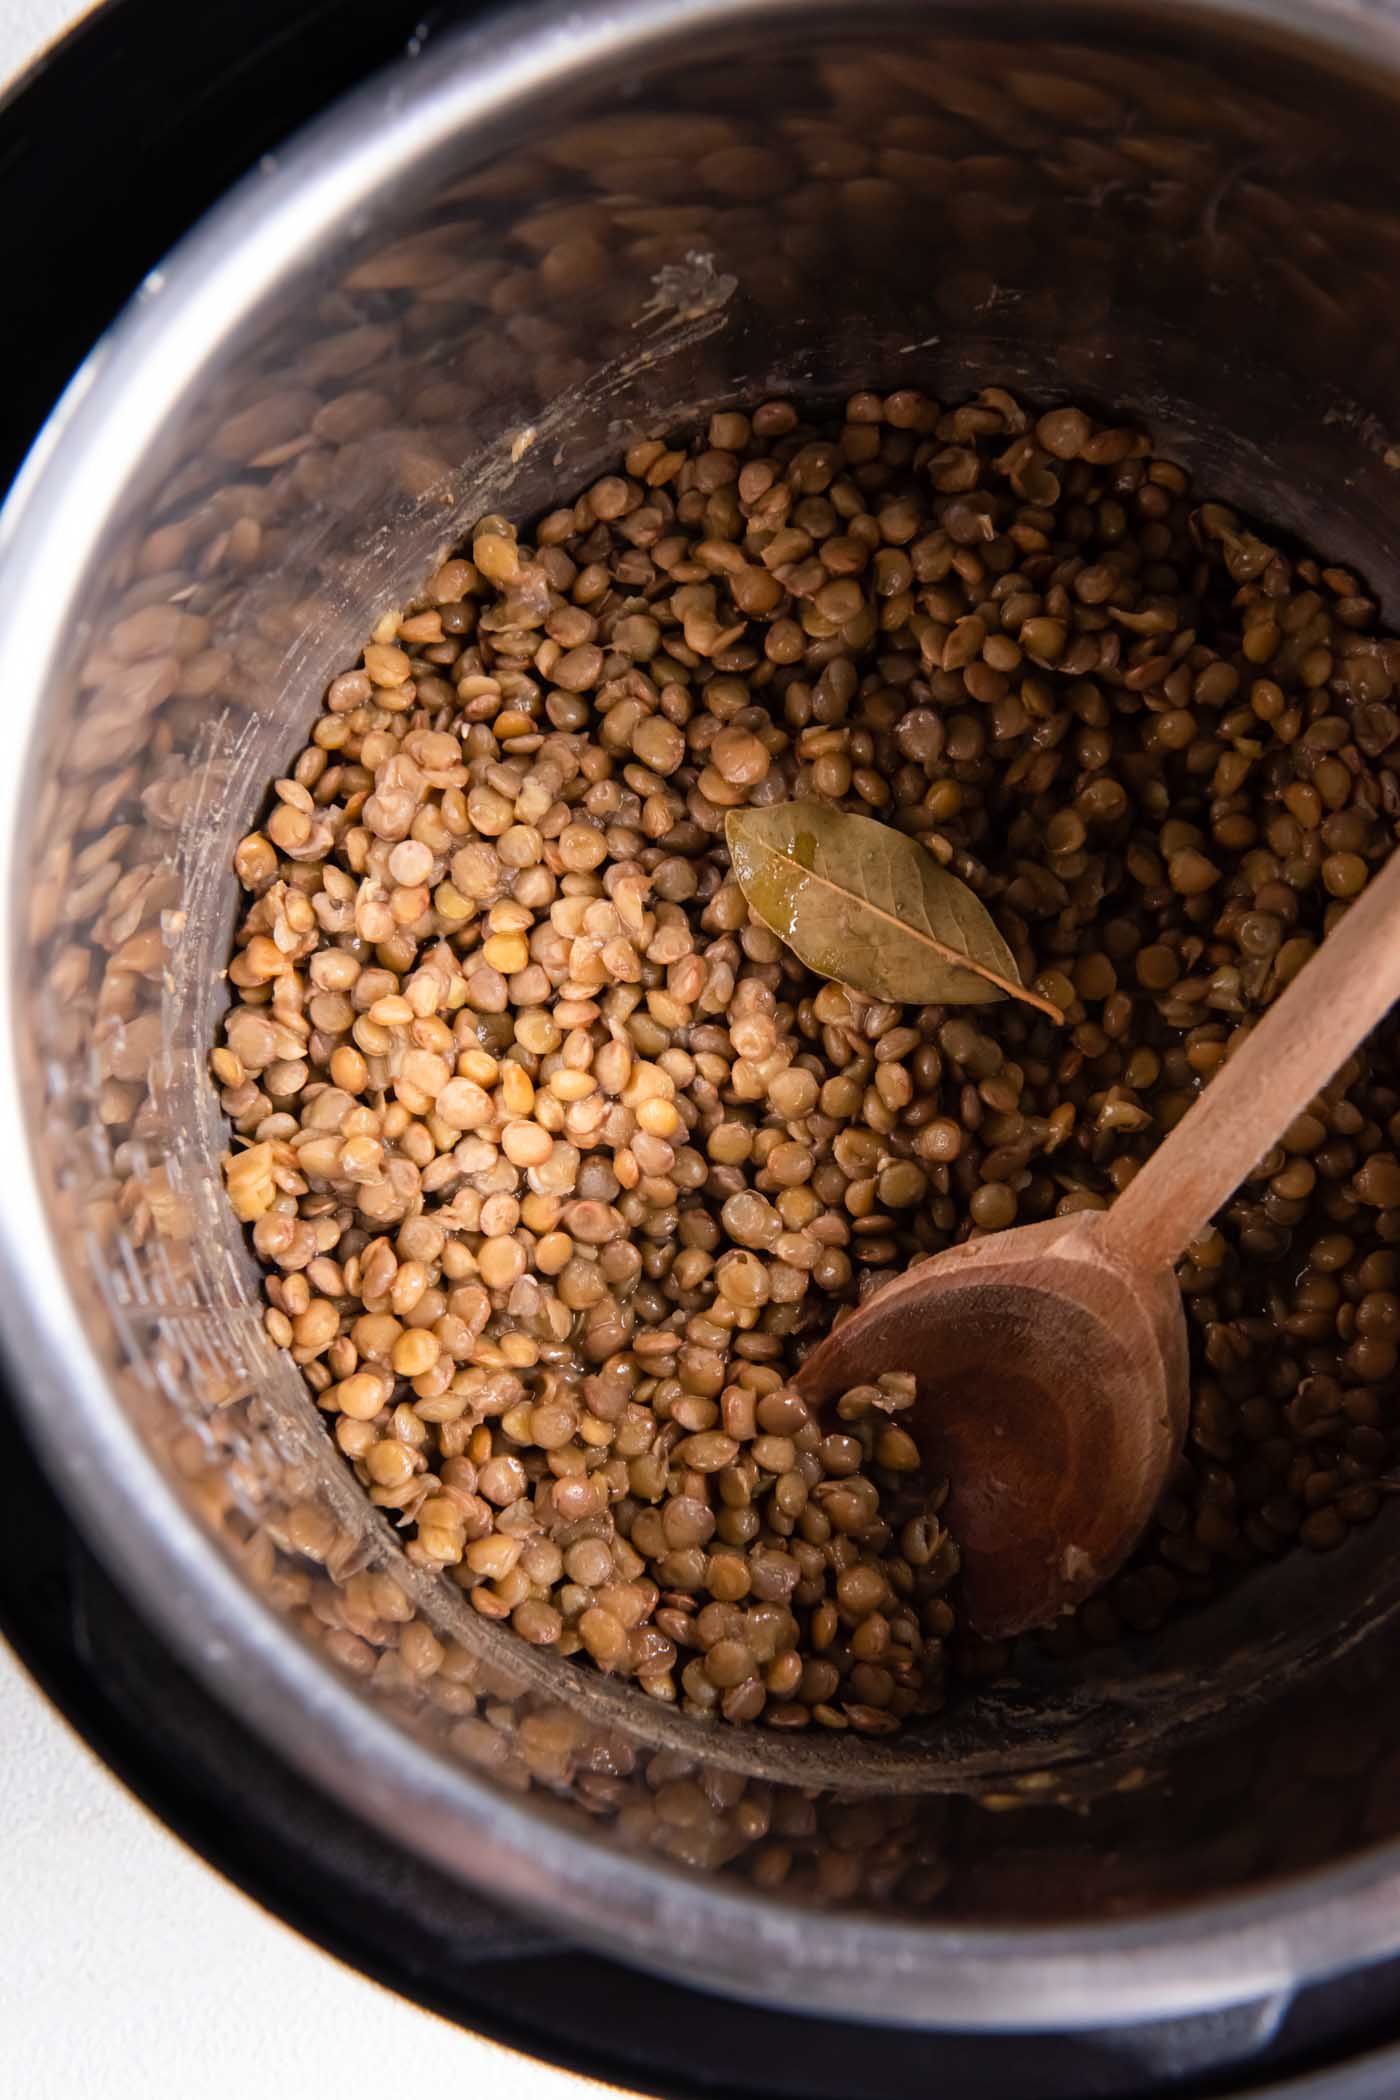 Cooked lentils in instant pot with bay leaf and wooden spoon.